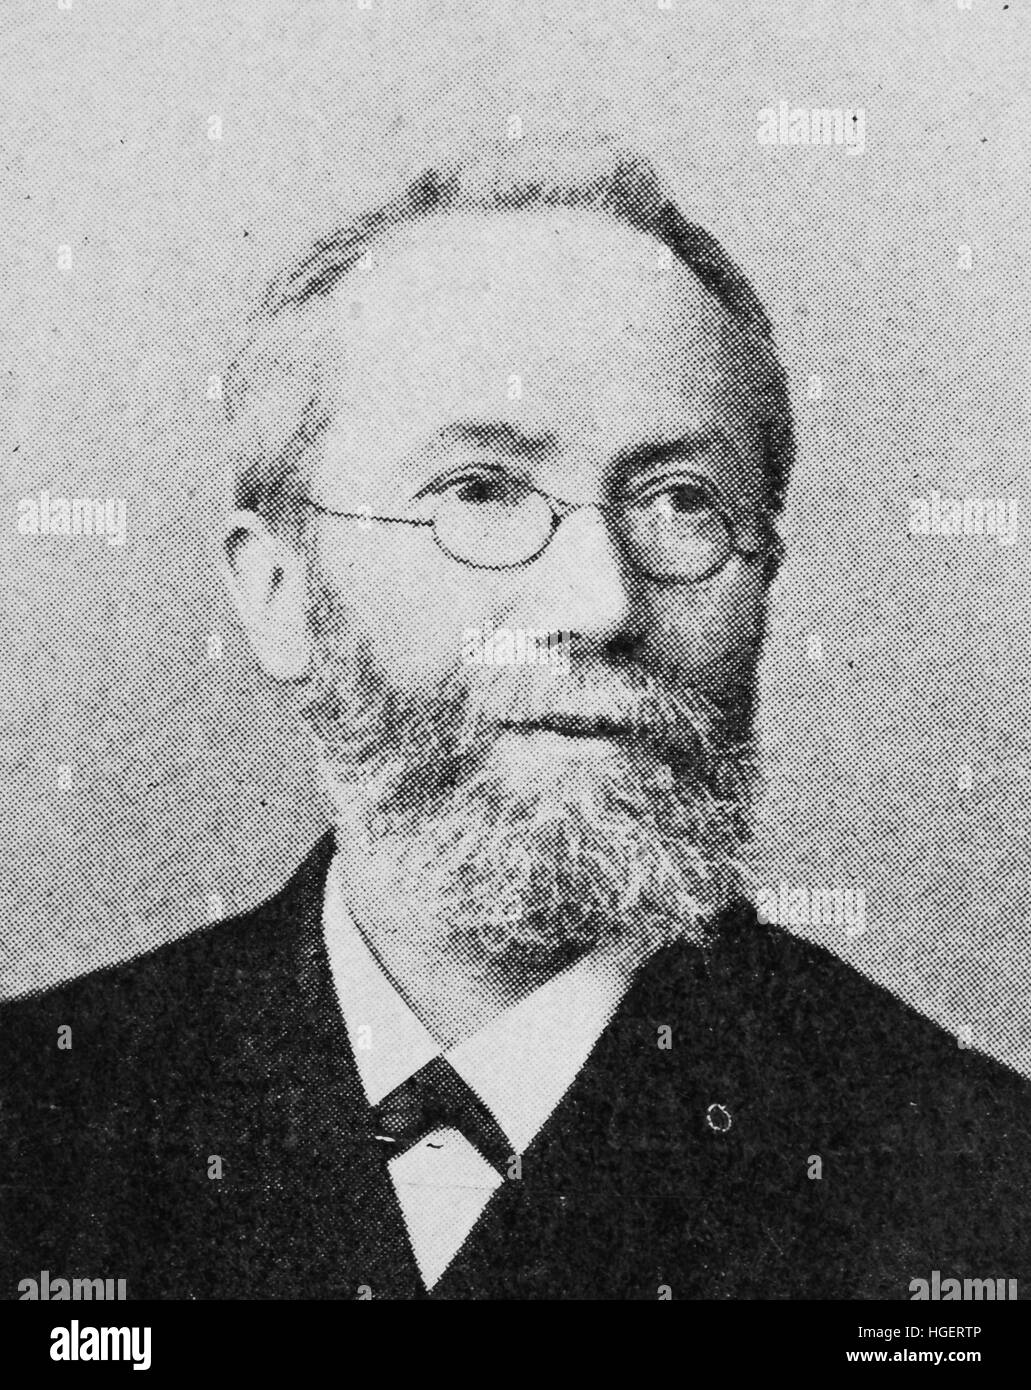 Georg Cornelius Karl Gerland, Born January 29, 1833; Died February 16, 1919, pseudonym Fritz Walter, was a German geographer and geophysicist, reproduction of a photo from the year 1895, digital improved Stock Photo